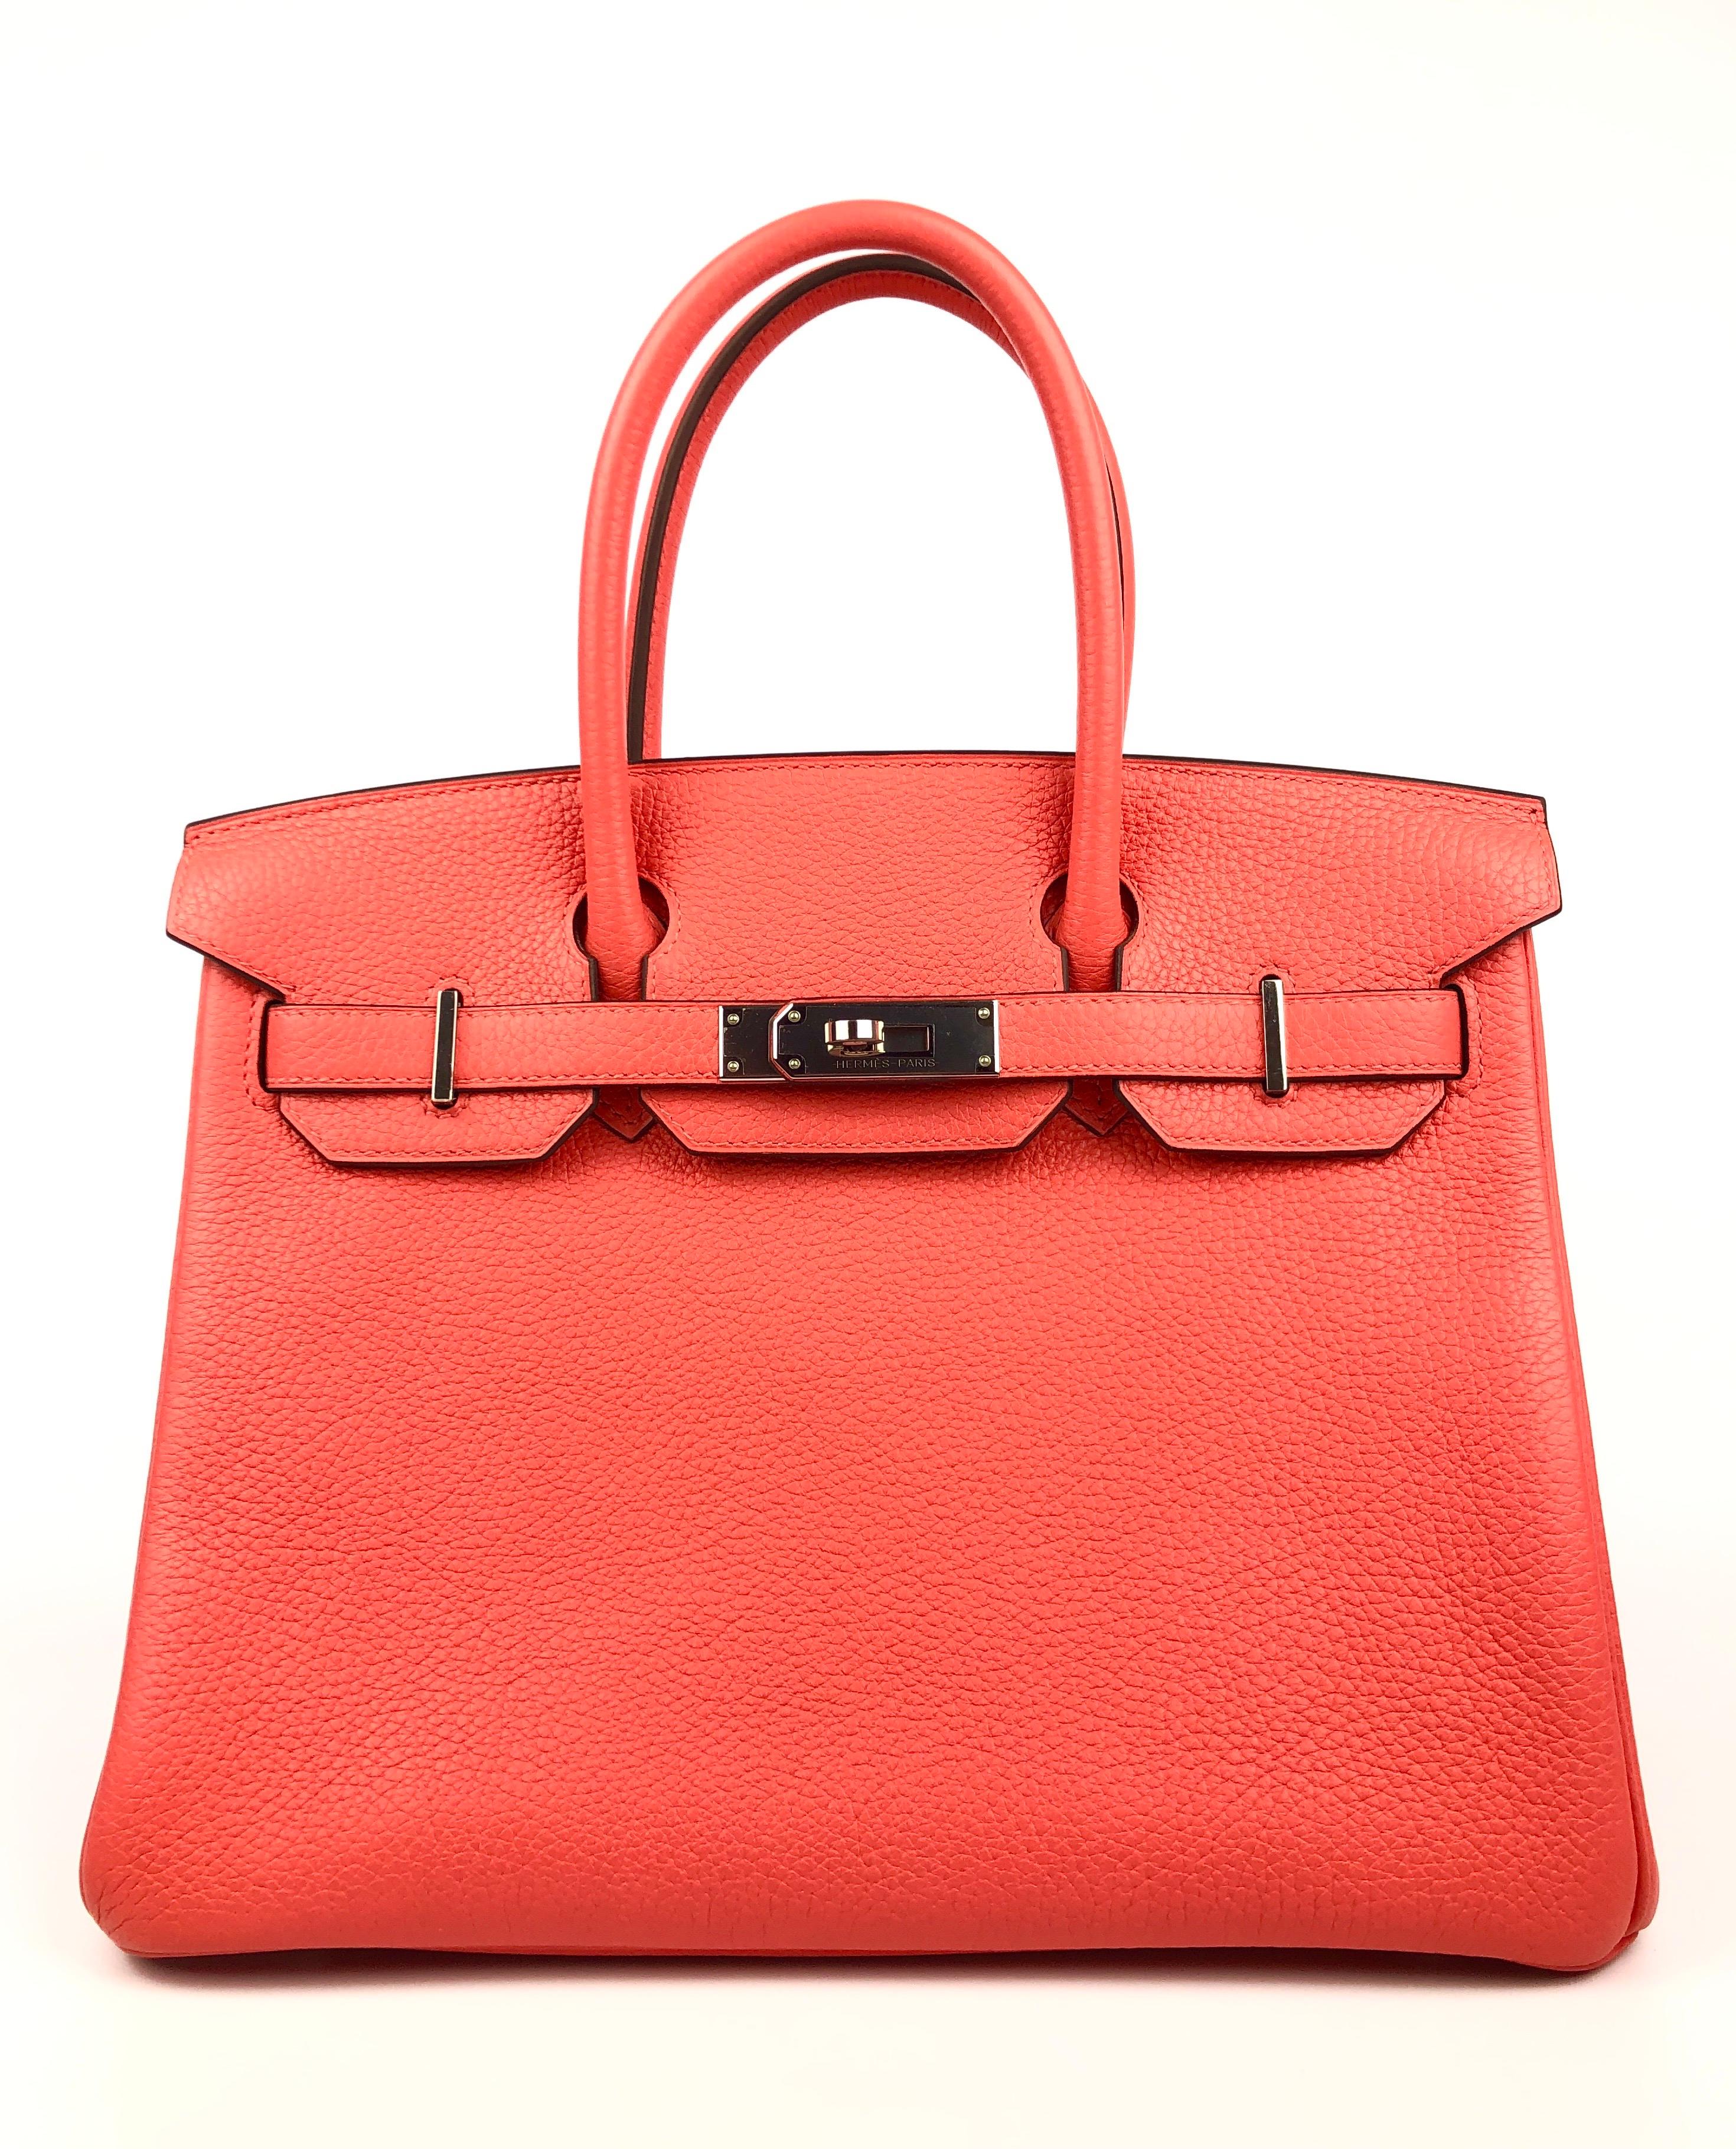 Stunning Hermes Birkin 30 Rose Jaipur Palladium Hardware.  Excellent Pristine Condition, Plastic on Hardware and feet. Excellent corners and Structure.

Shop with Confidence from Lux Addicts. Authenticity Guaranteed. 